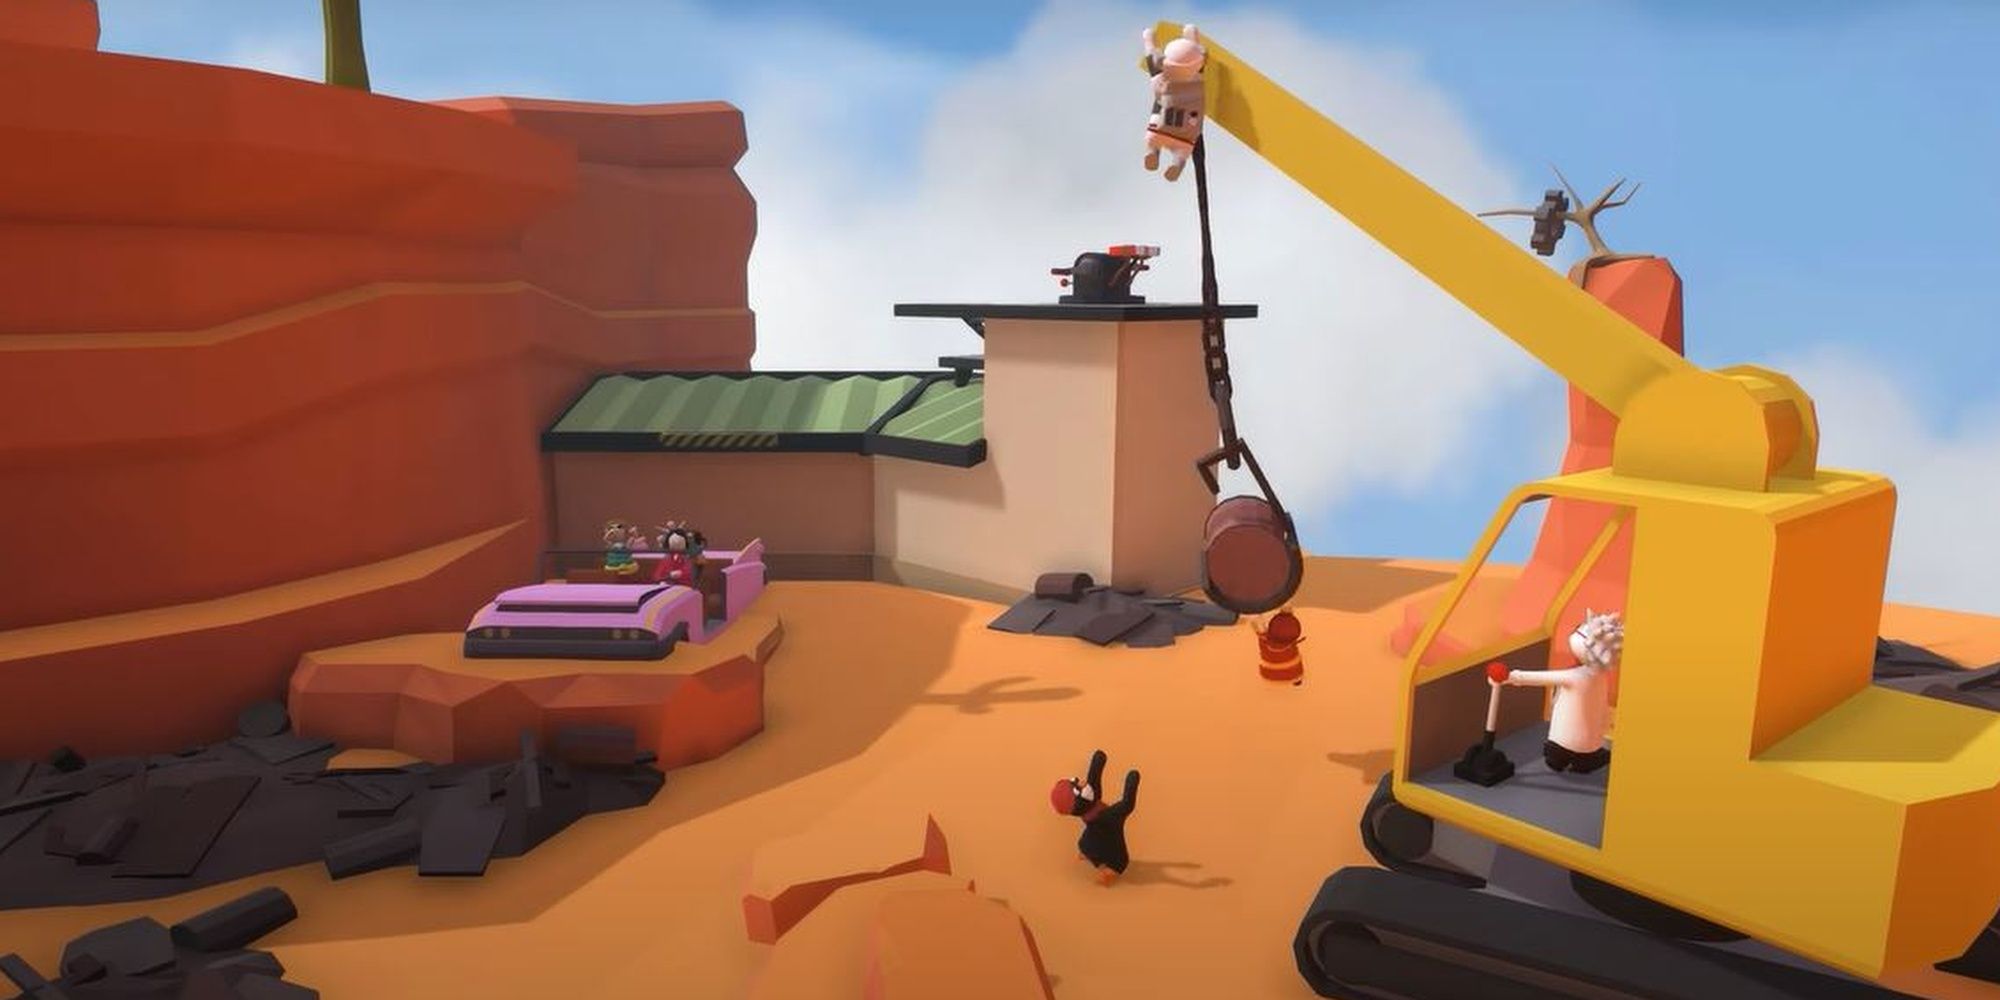 Human Fall Flat characters hang from the end of a wrecking ball while another person lifts a crane